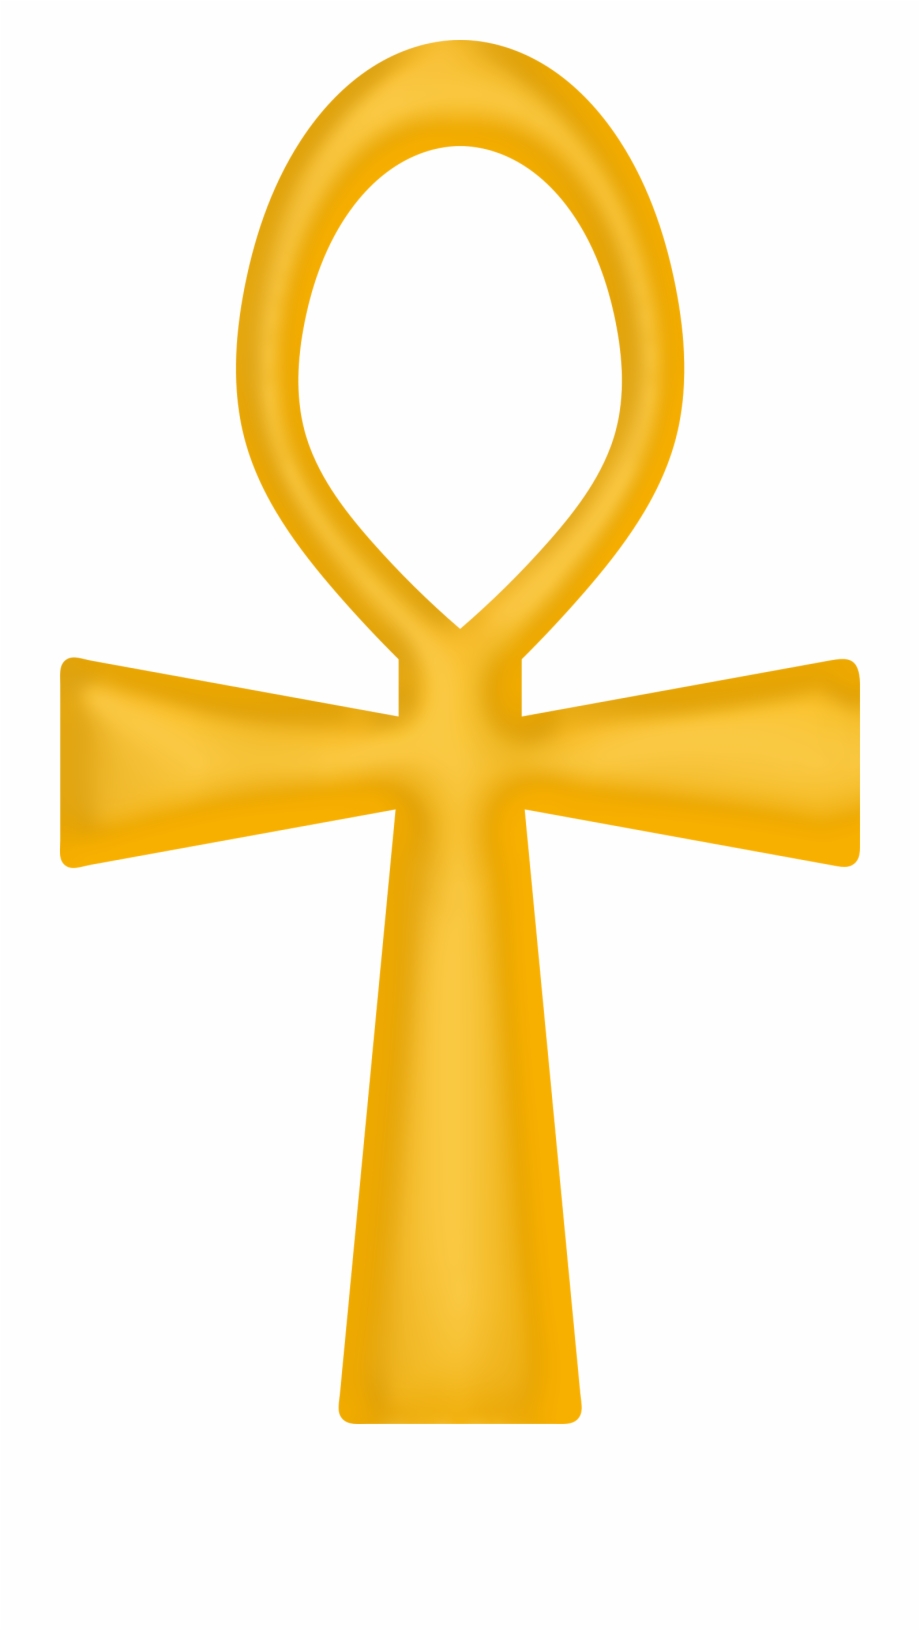 This Free Icons Png Design Of Golden Ankh